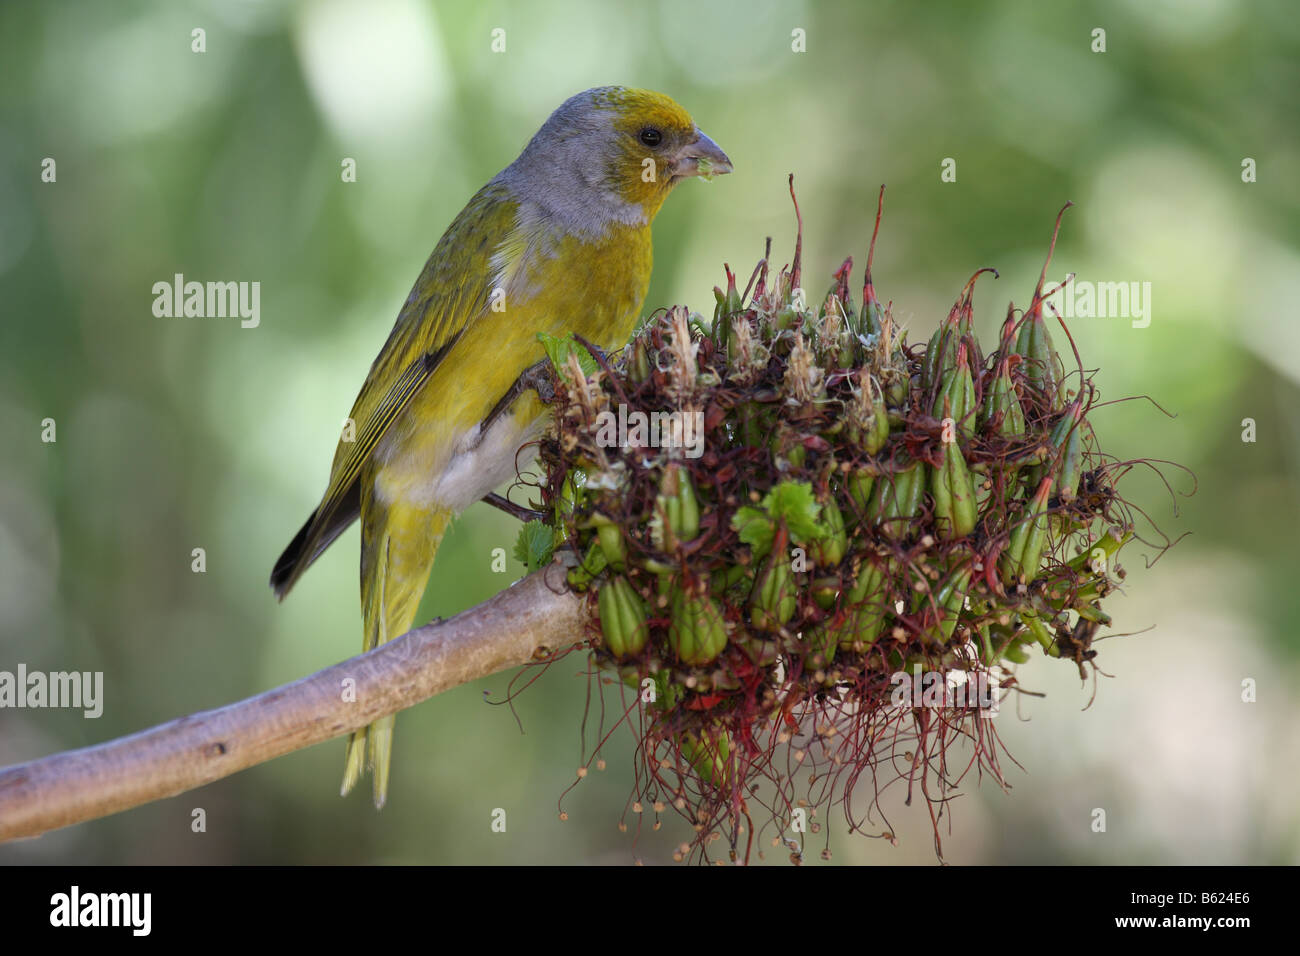 Cape canary eating seeds from a flower head Stock Photo